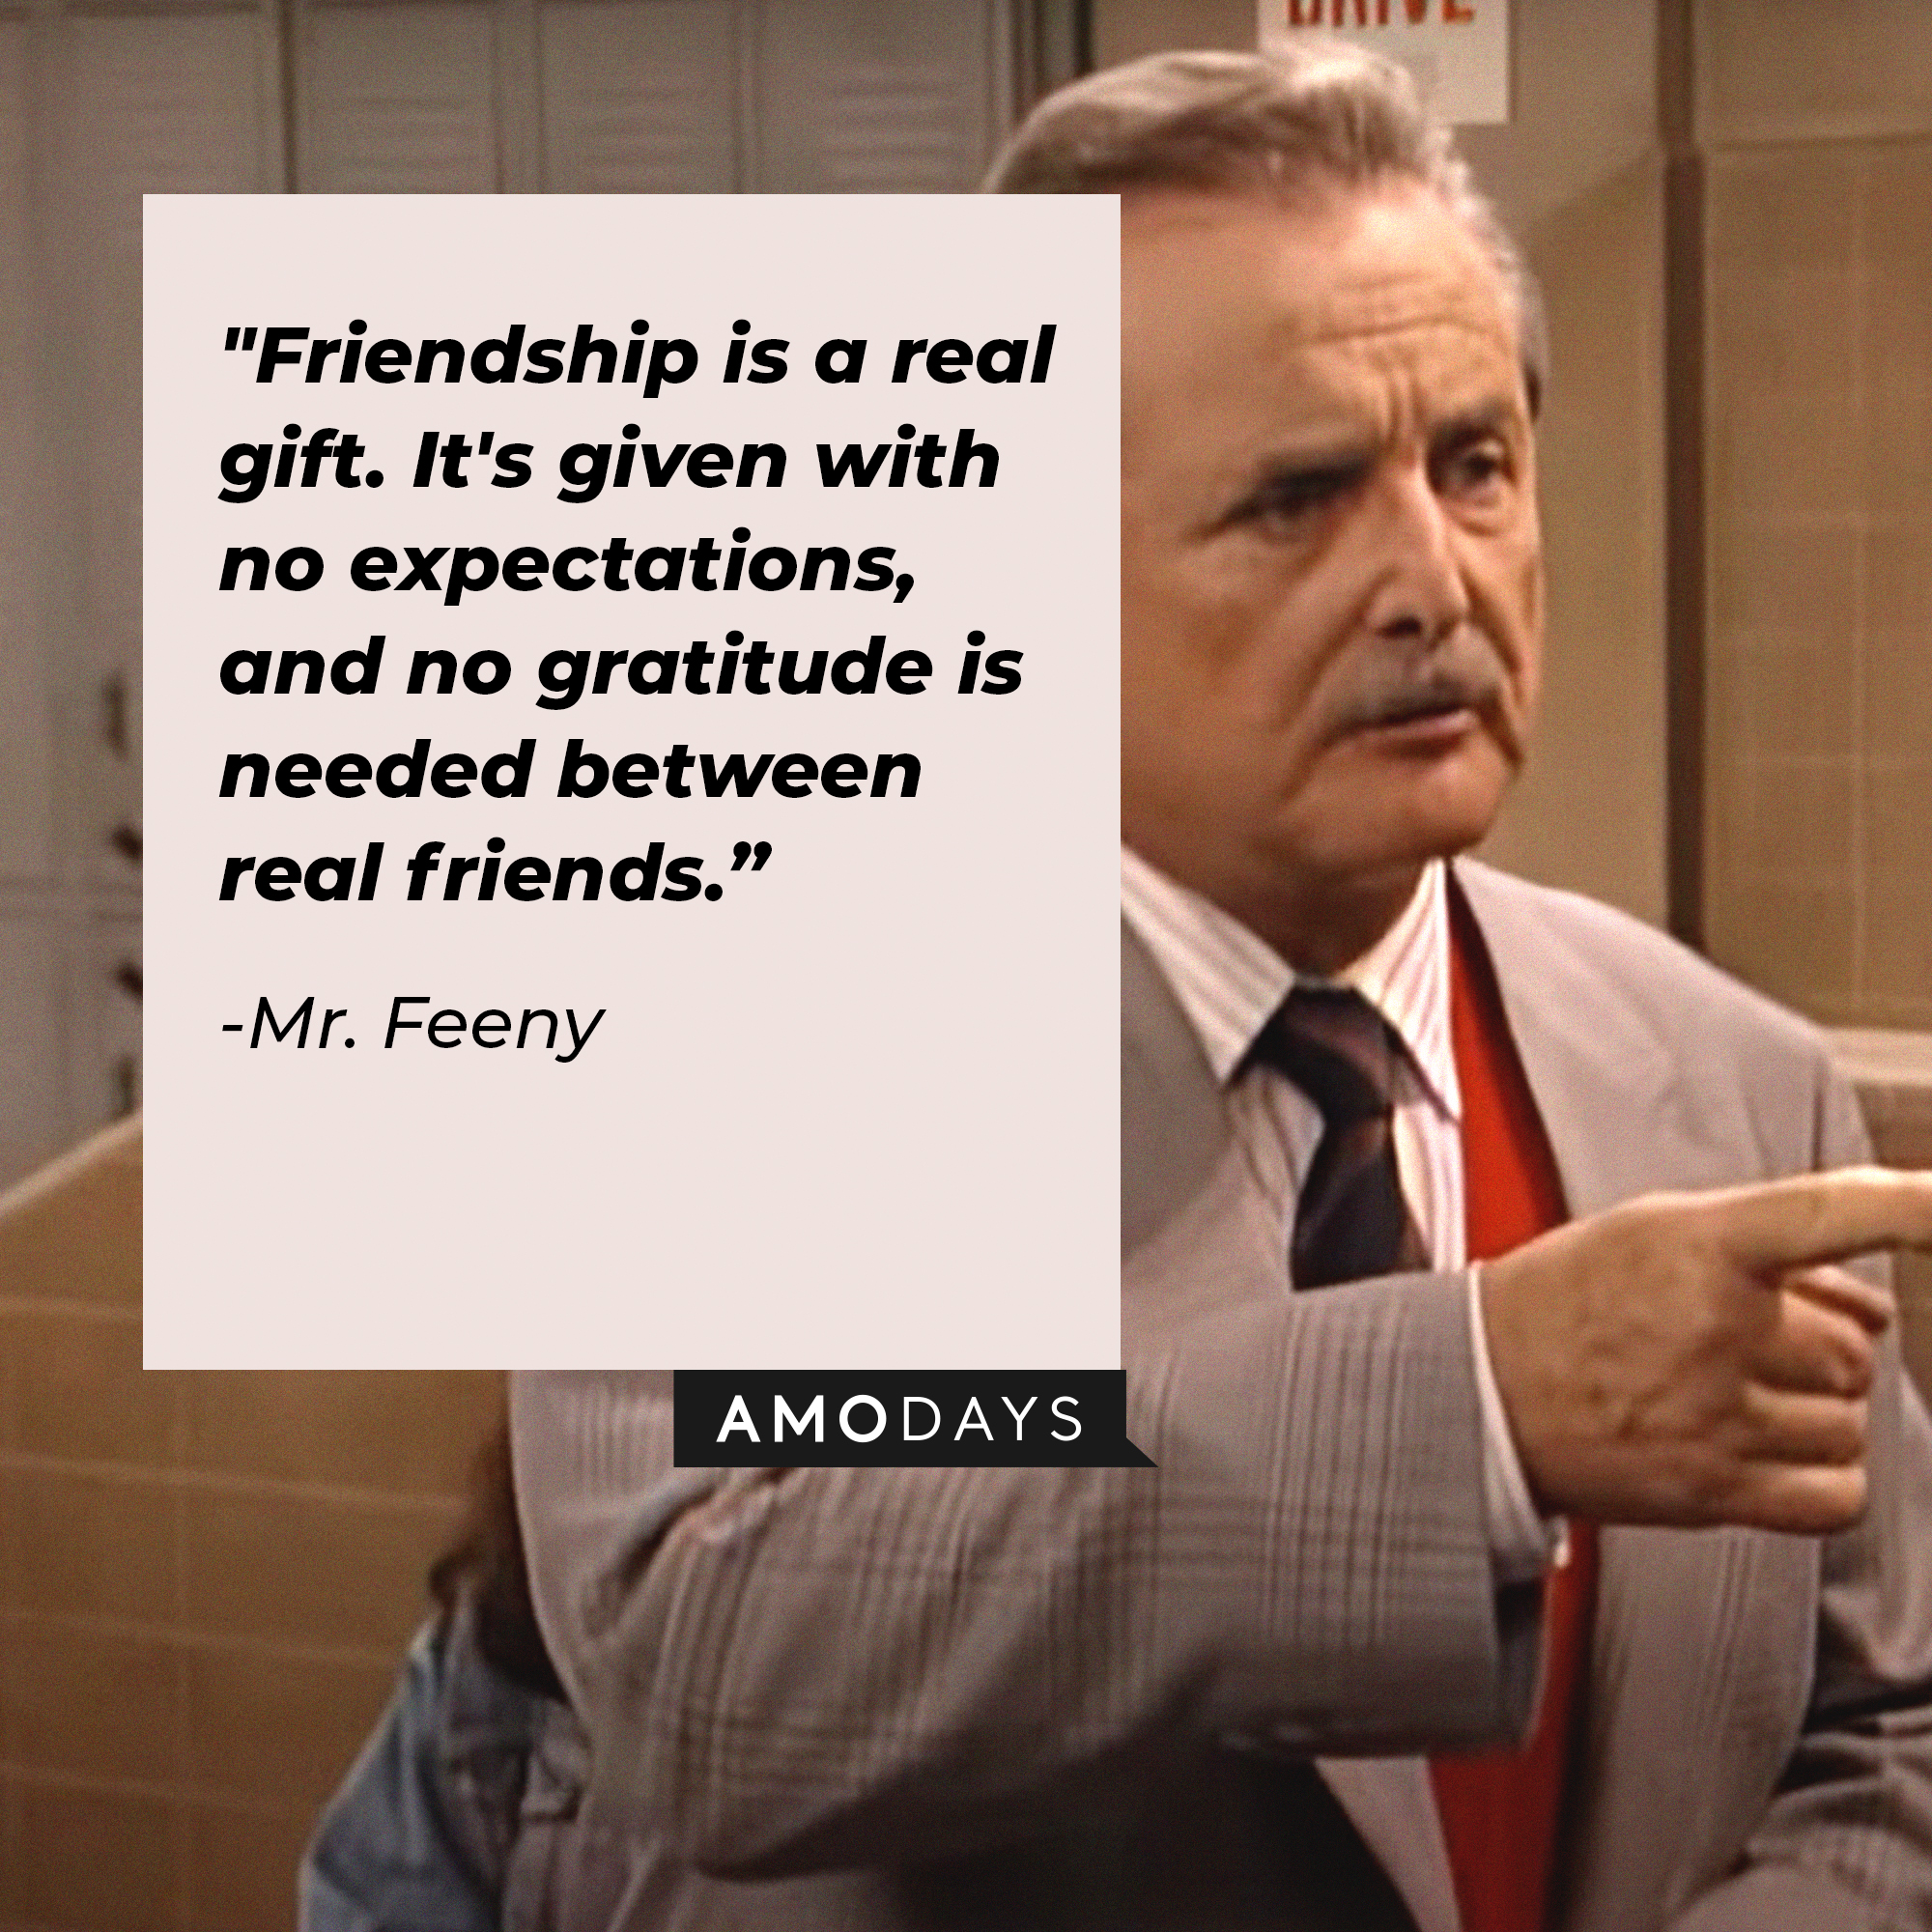 An image of Mr. Feeny with his quote: "Friendship is a real gift. It's given with no expectations, and no gratitude is needed between real friends.” | Source: facebook.com/BoyMeetsWorldSeries